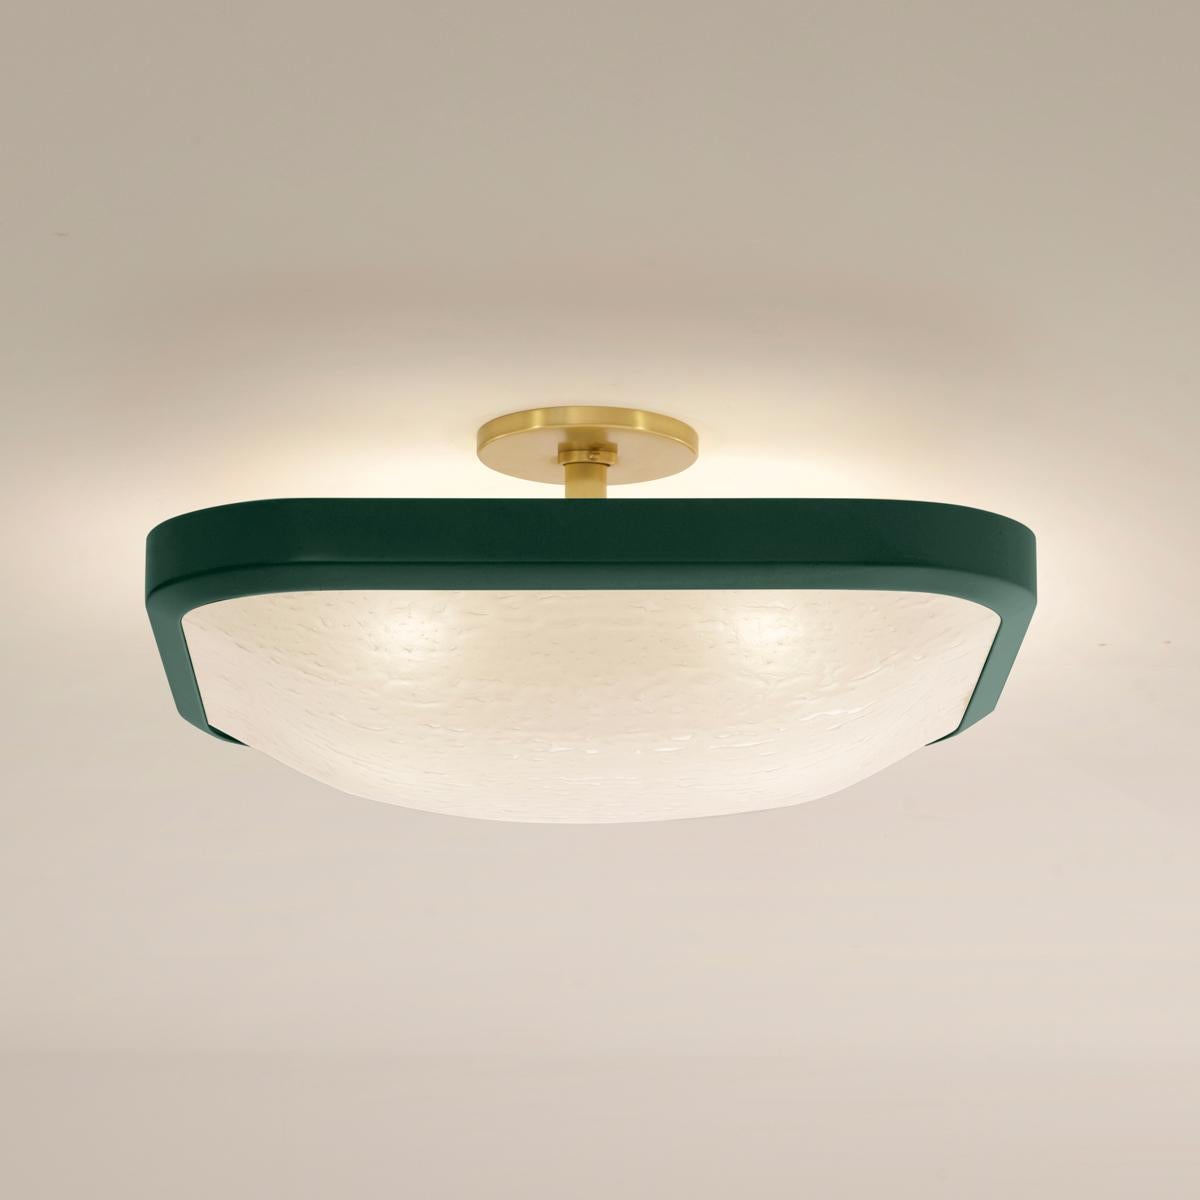 The Uno Square ceiling light exemplifies simple elegance via its clean profile designed around a single Murano glass shade.

Shown in the primary images in Alpine Green and satin brass-subsequent pictures show the fixture in other featured